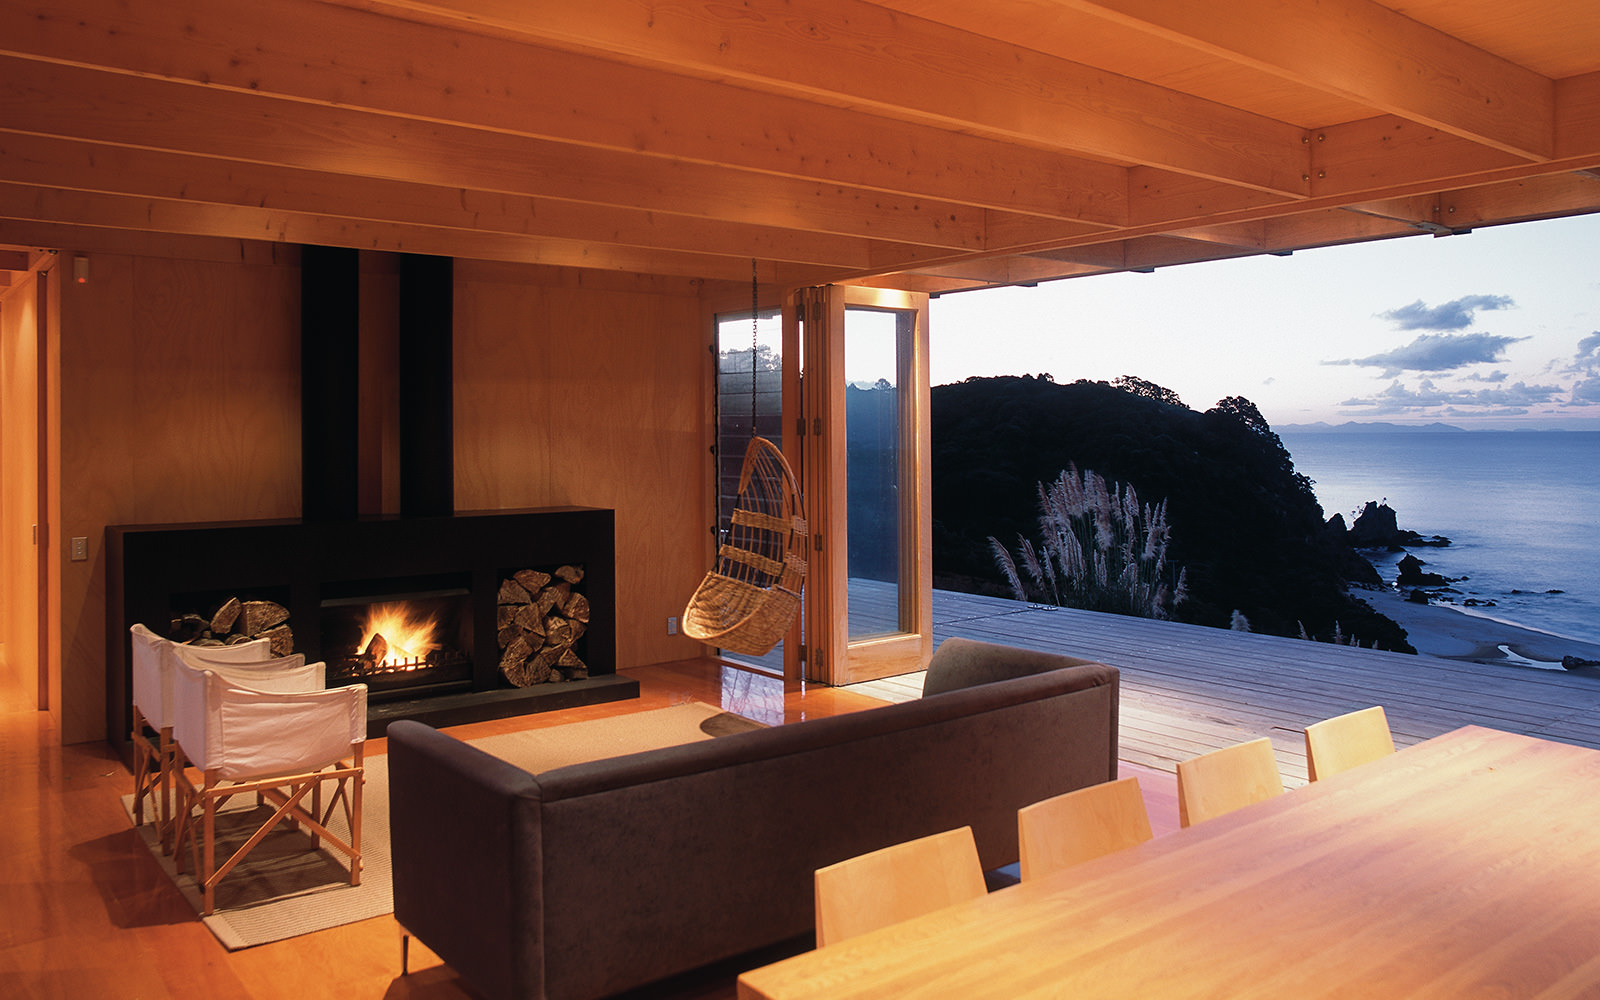 Steel fireplace in timber architectural interior